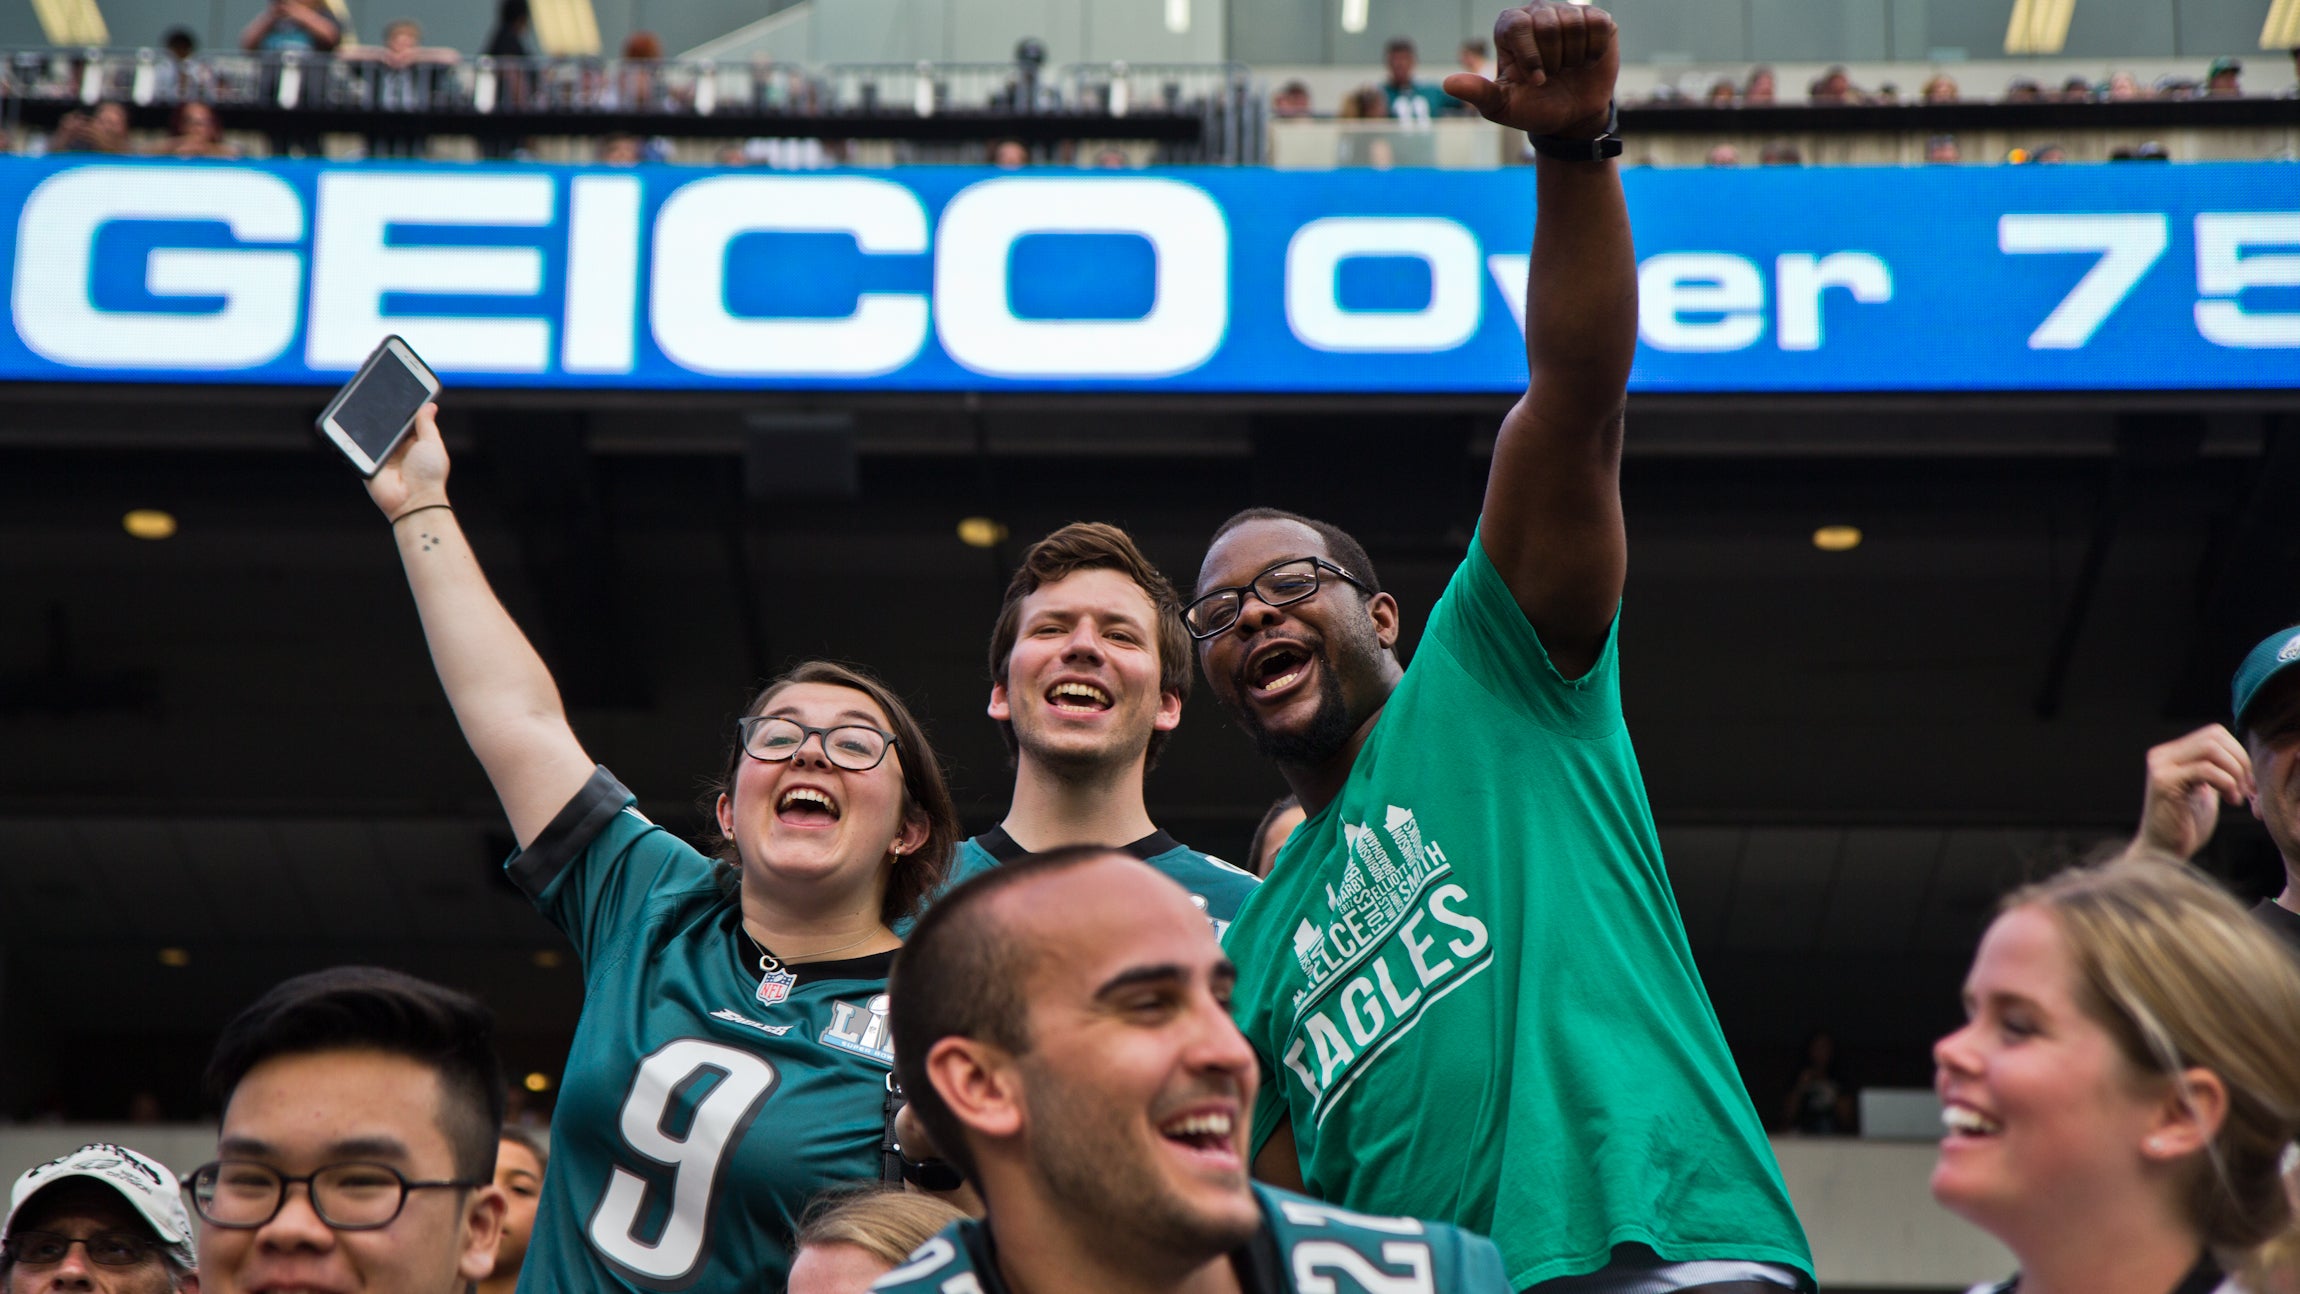 Just 1 in 5 Eagles fans say partner must root for the Birds